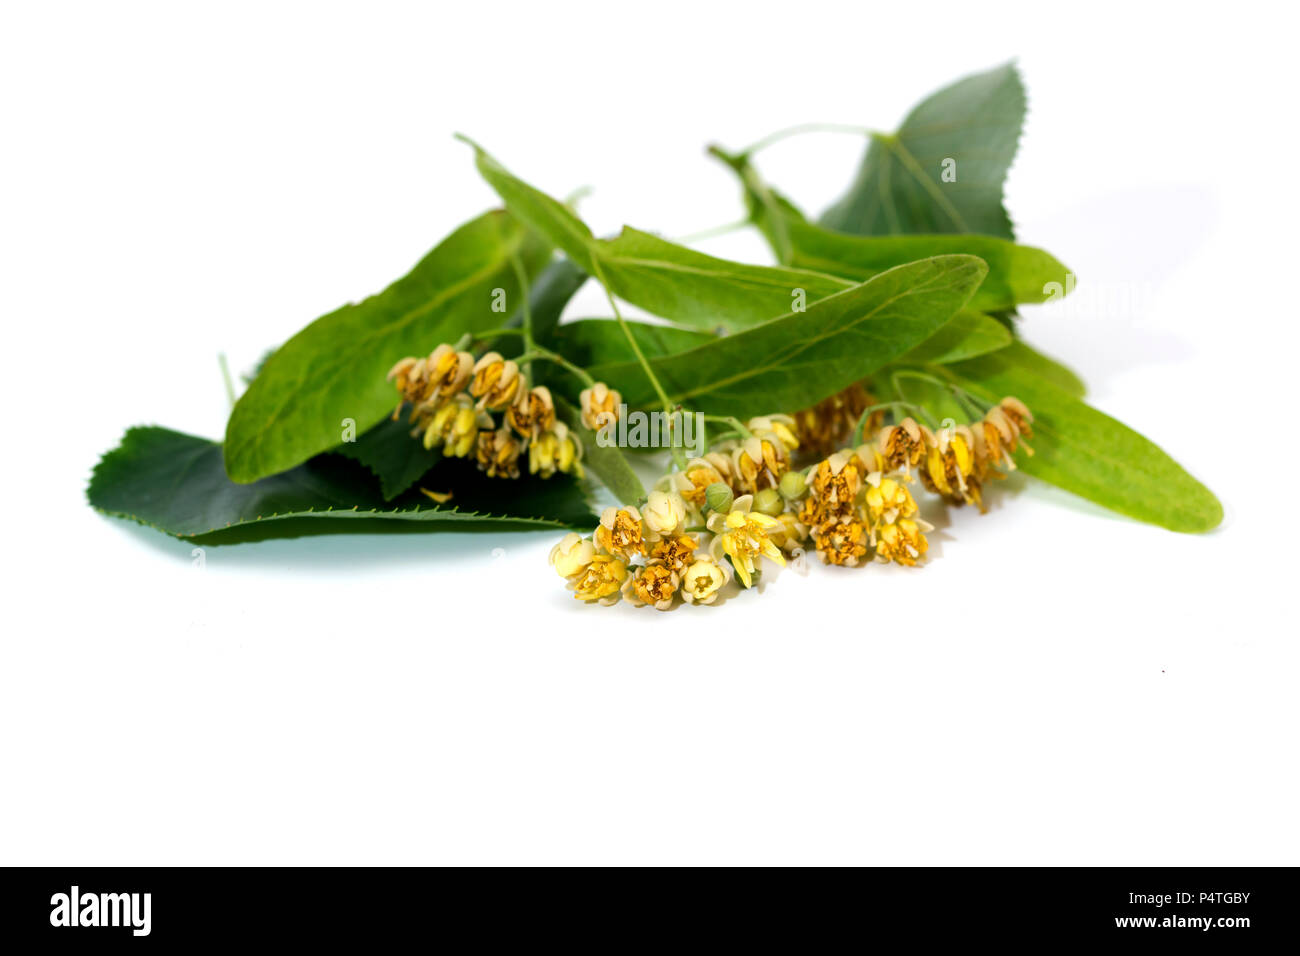 Flowers of linden on a white background Stock Photo